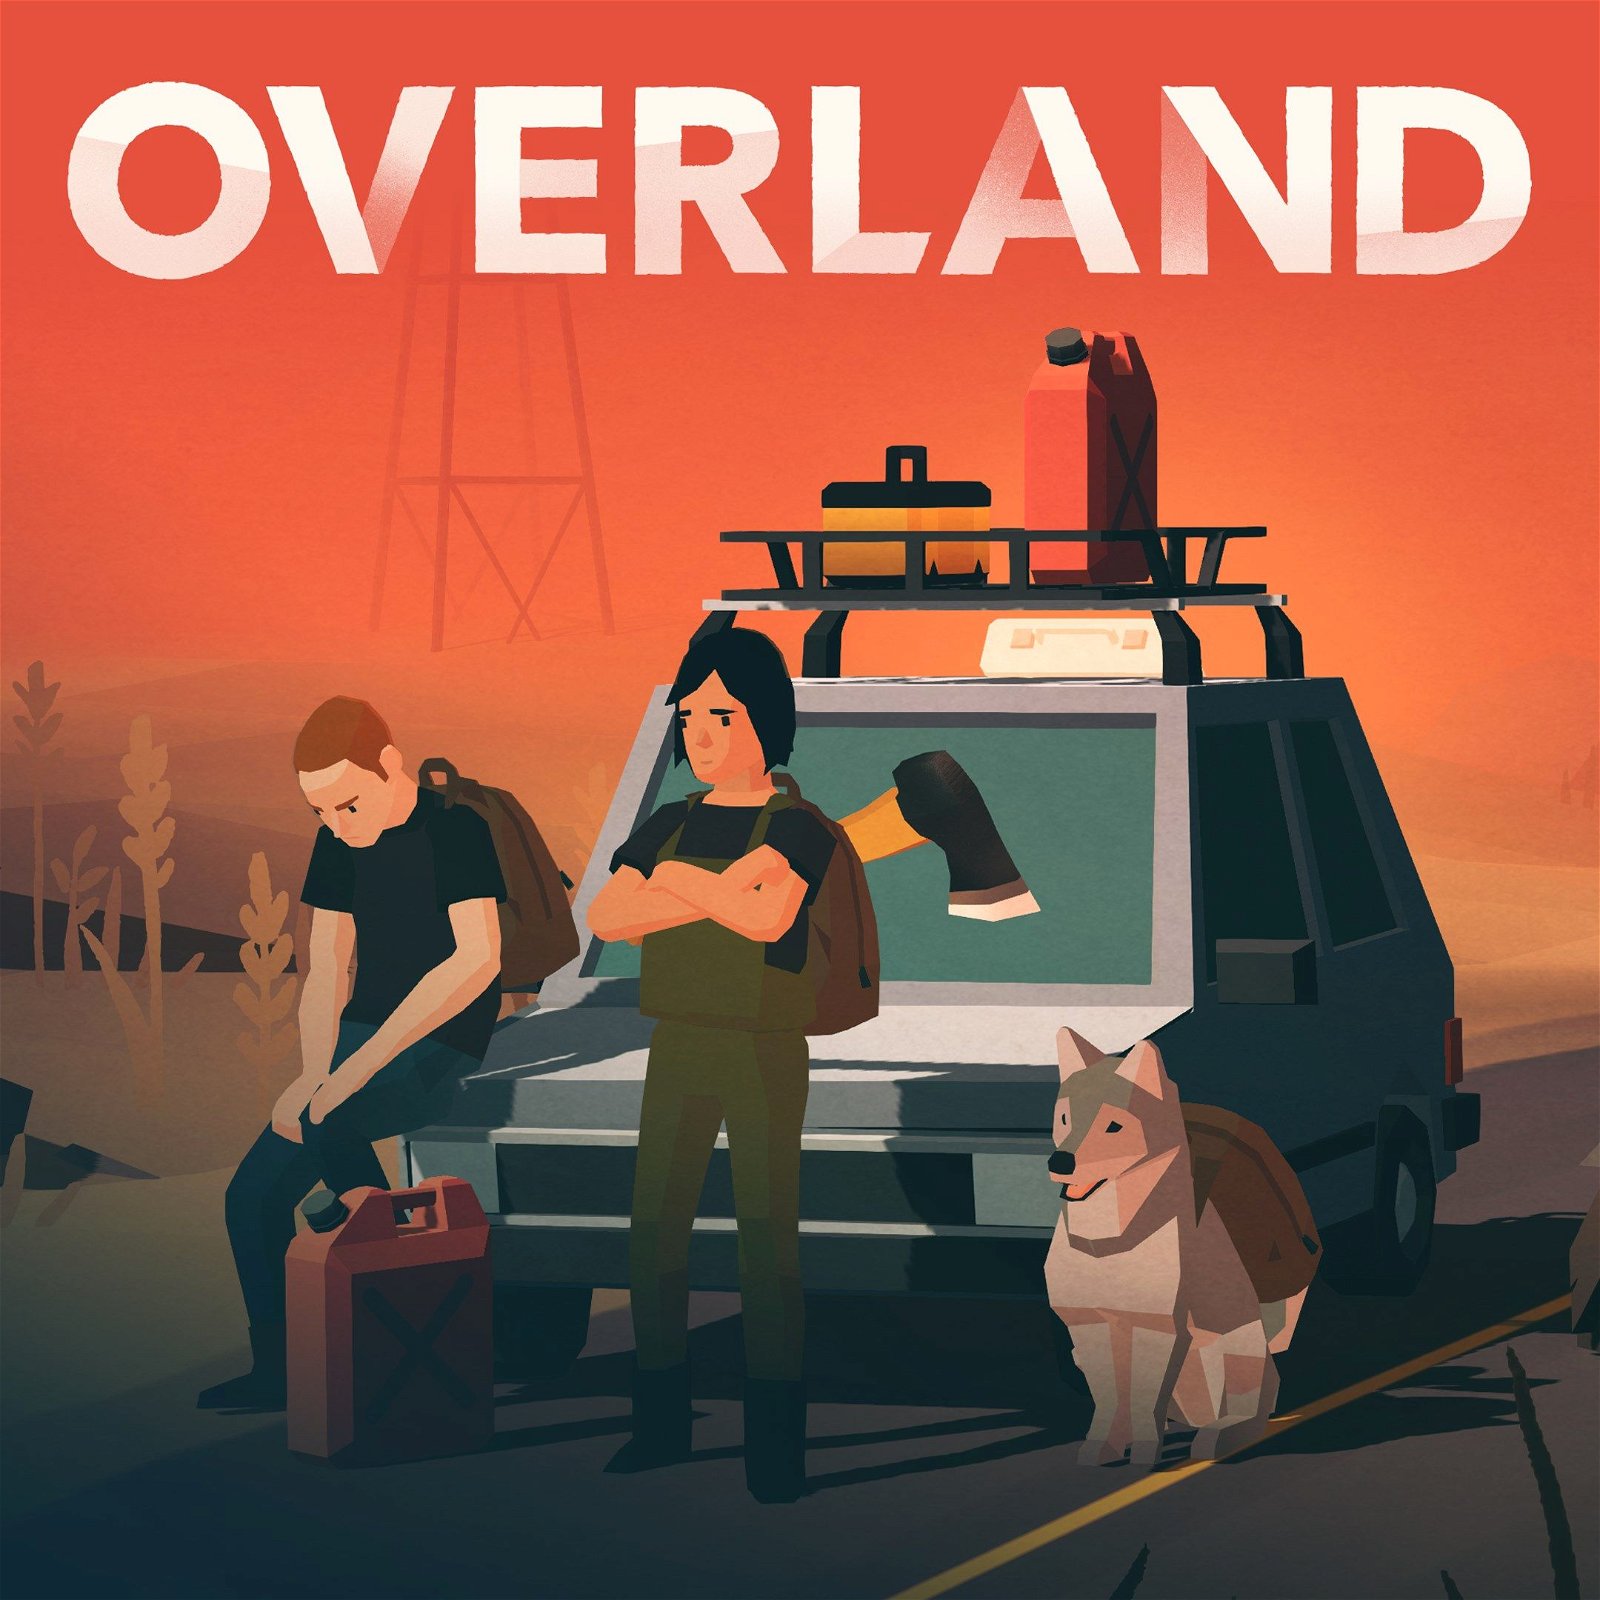 Image of Overland by Finji